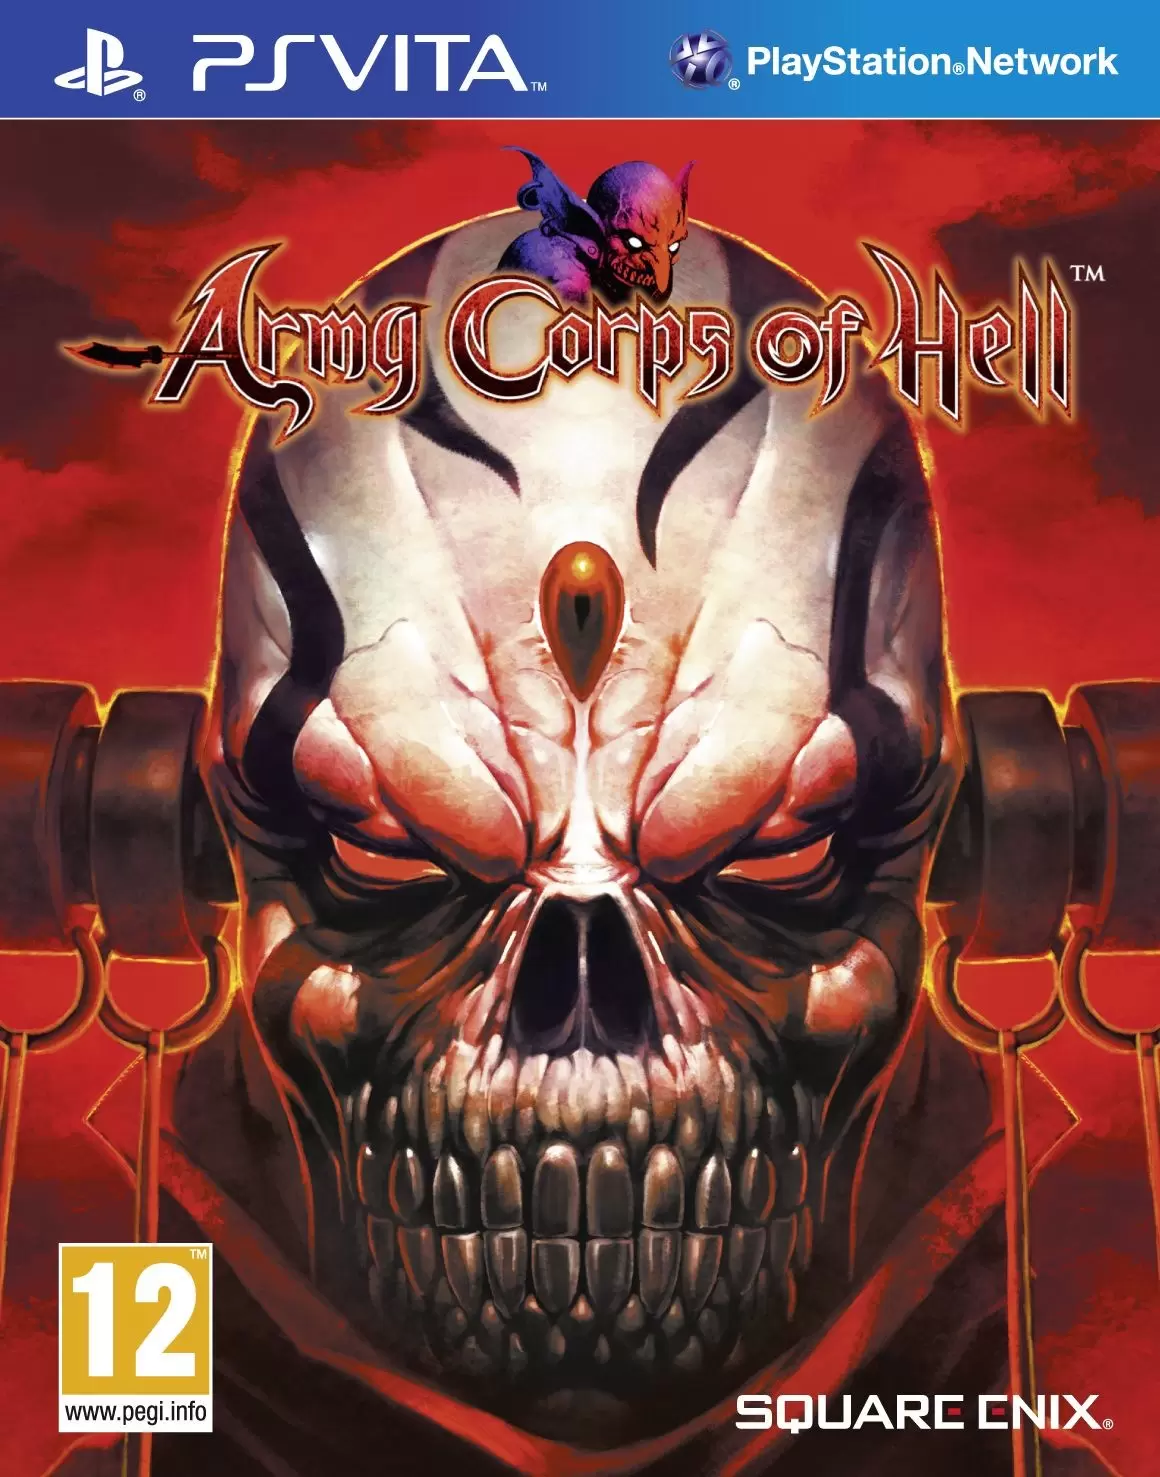 PS Vita Games - Army Corps of Hell